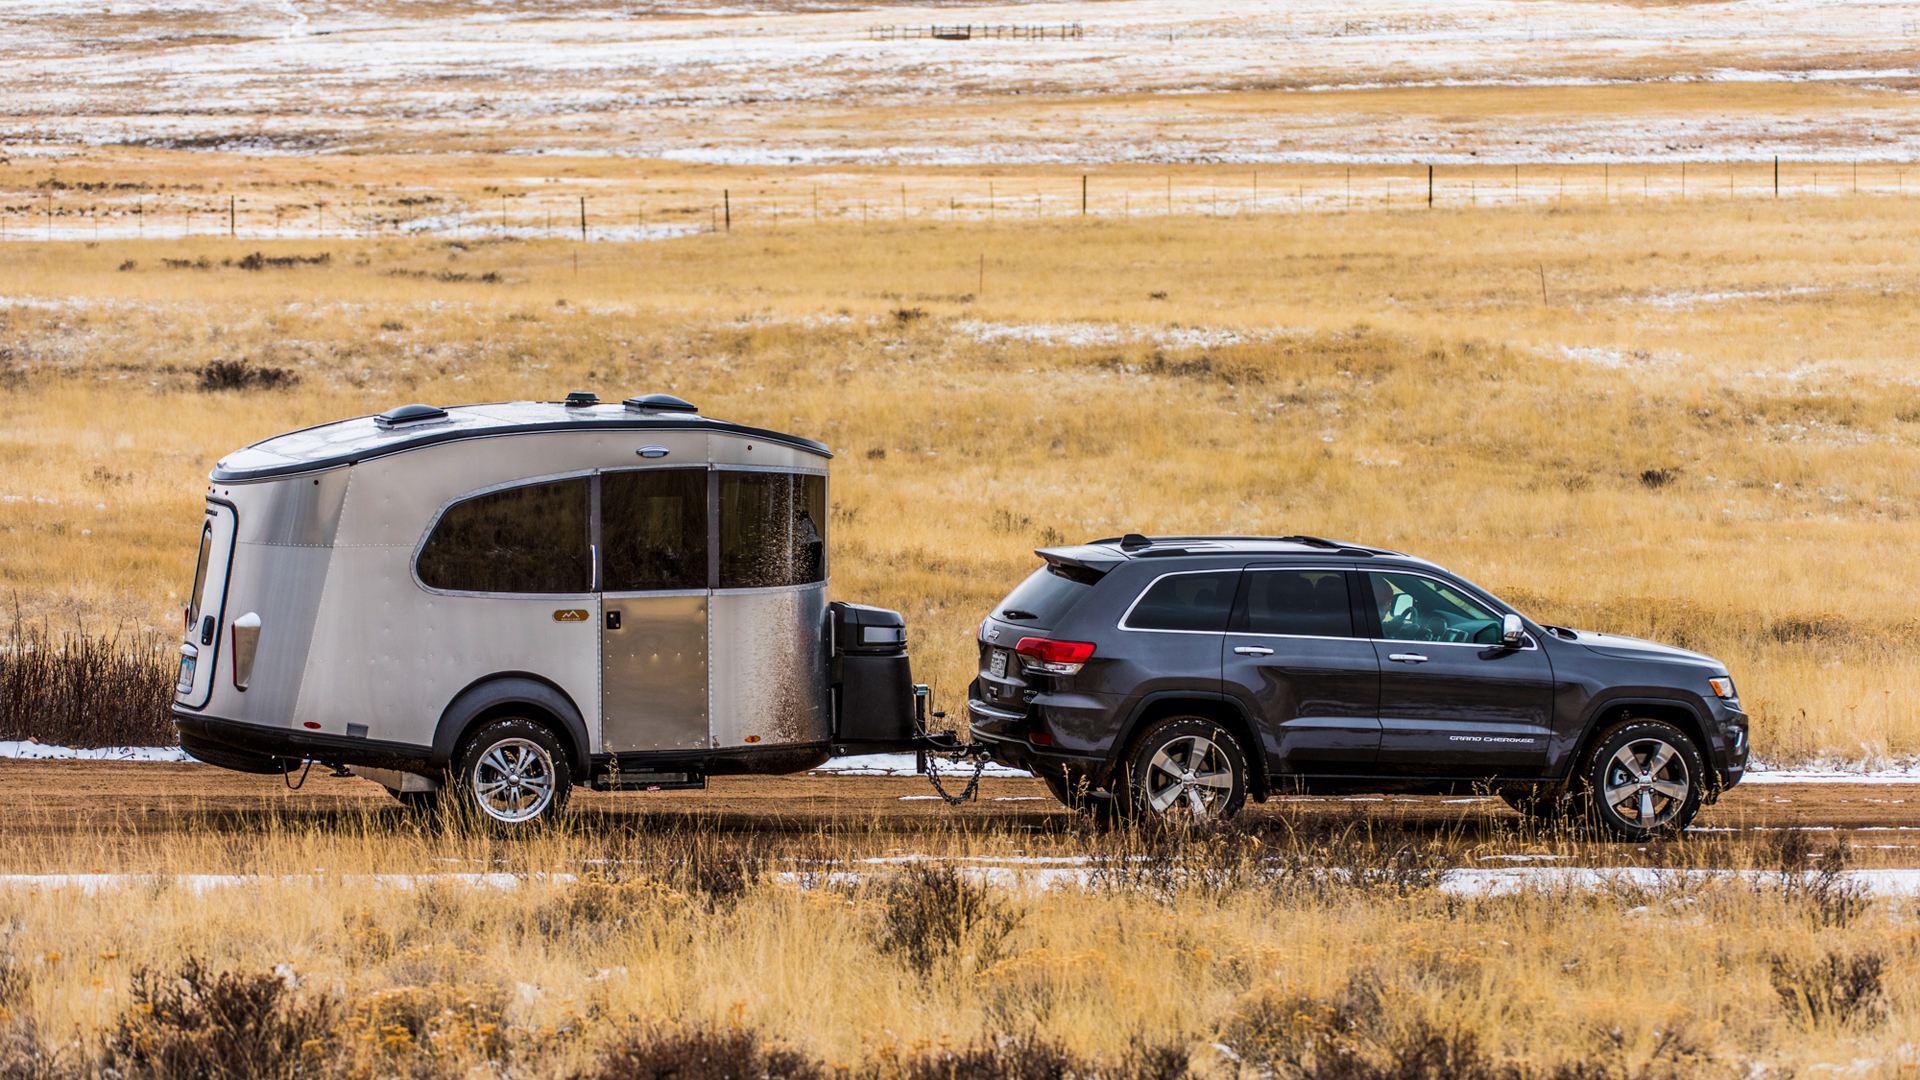 A SUV towing an Airstream Basecamp travel trailer.